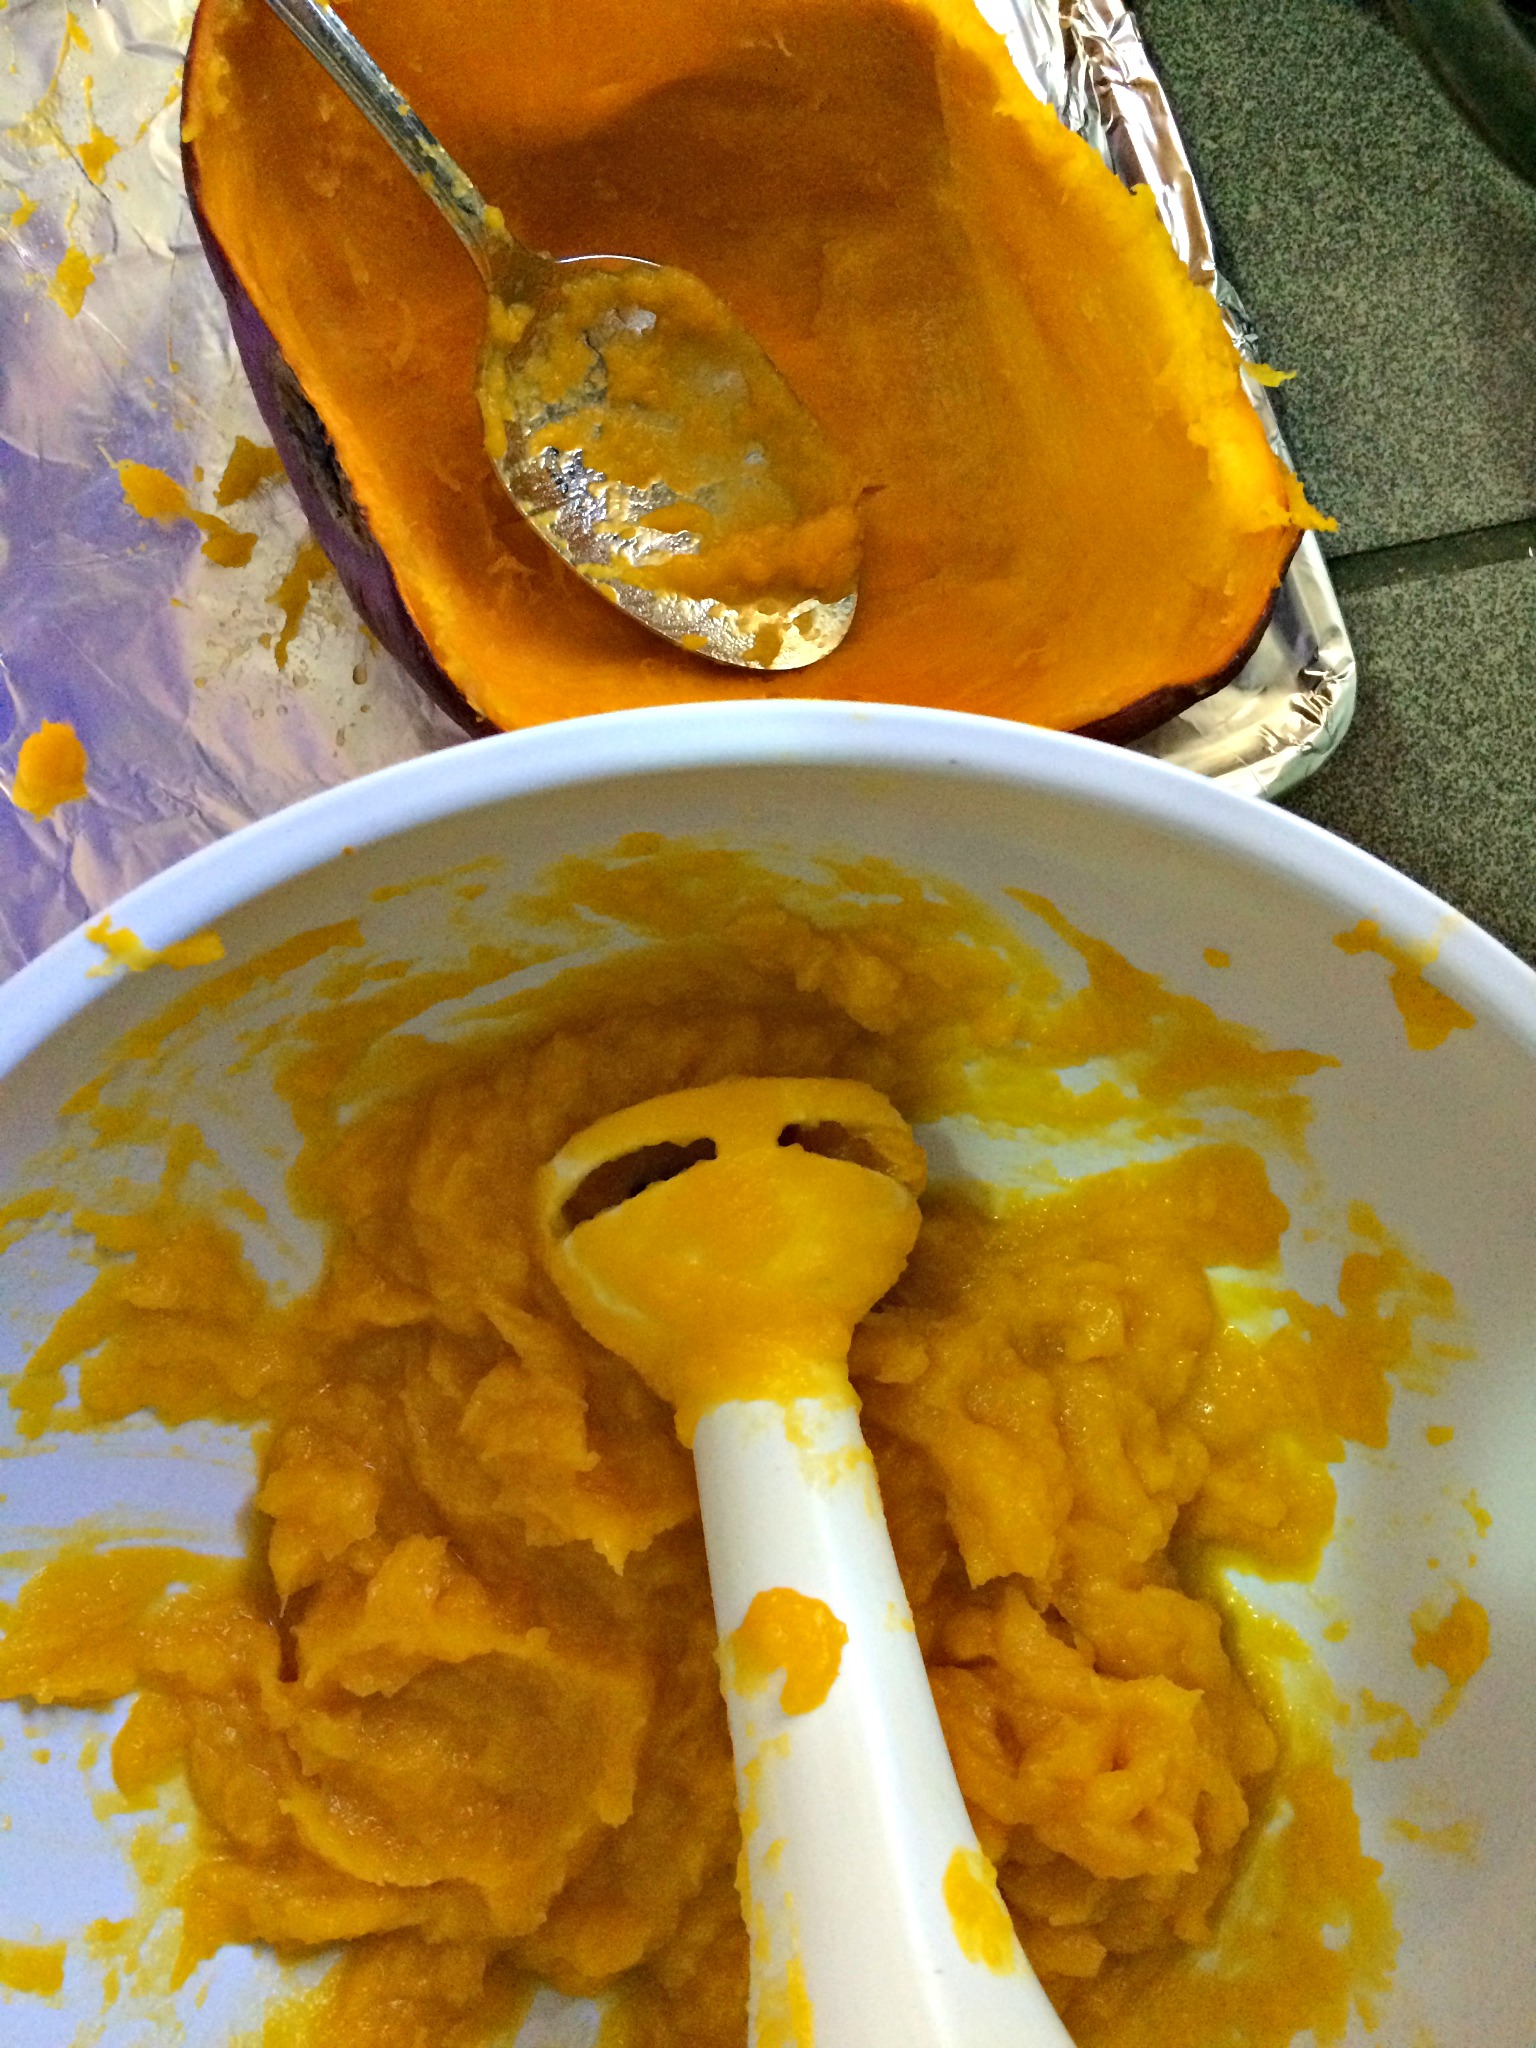 Blend yourself up some pumpkin puree - it's easier than you'd think!